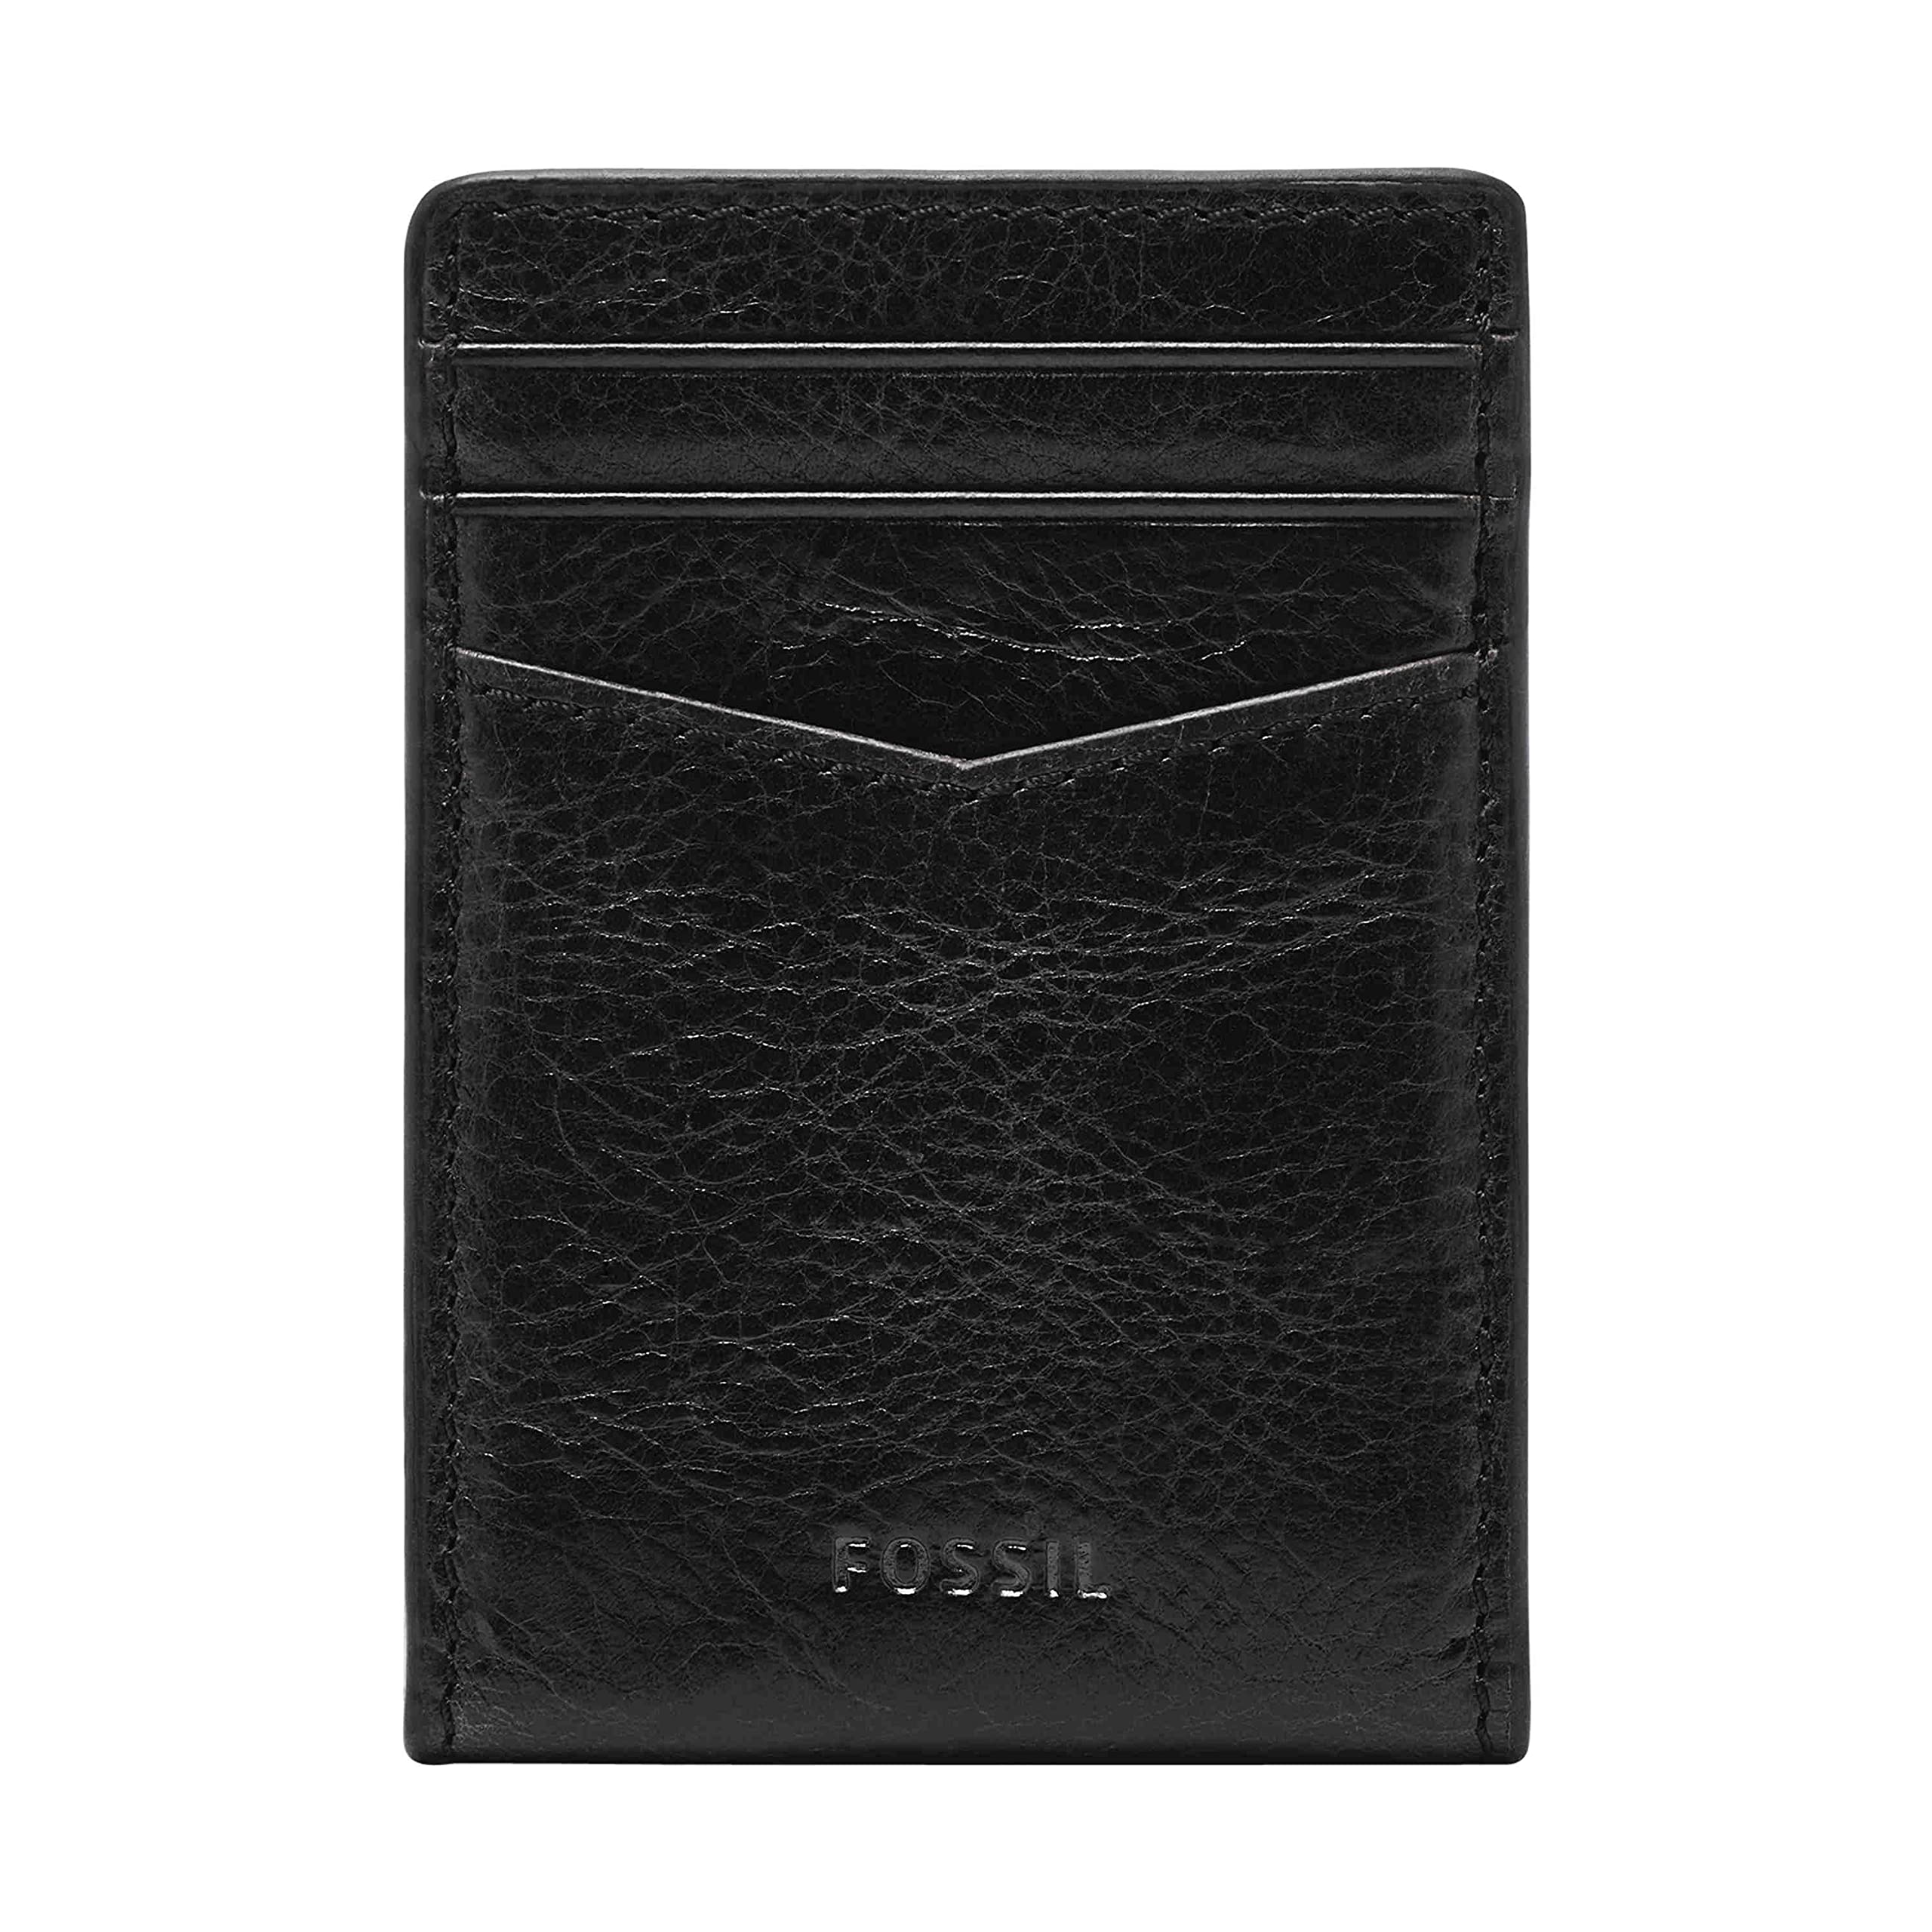 Fossil Men's Andrew Card Case Leather Wallet w/ Money Clip Front (Black) $12 & More + Free Shipping w/ Prime or on $35+